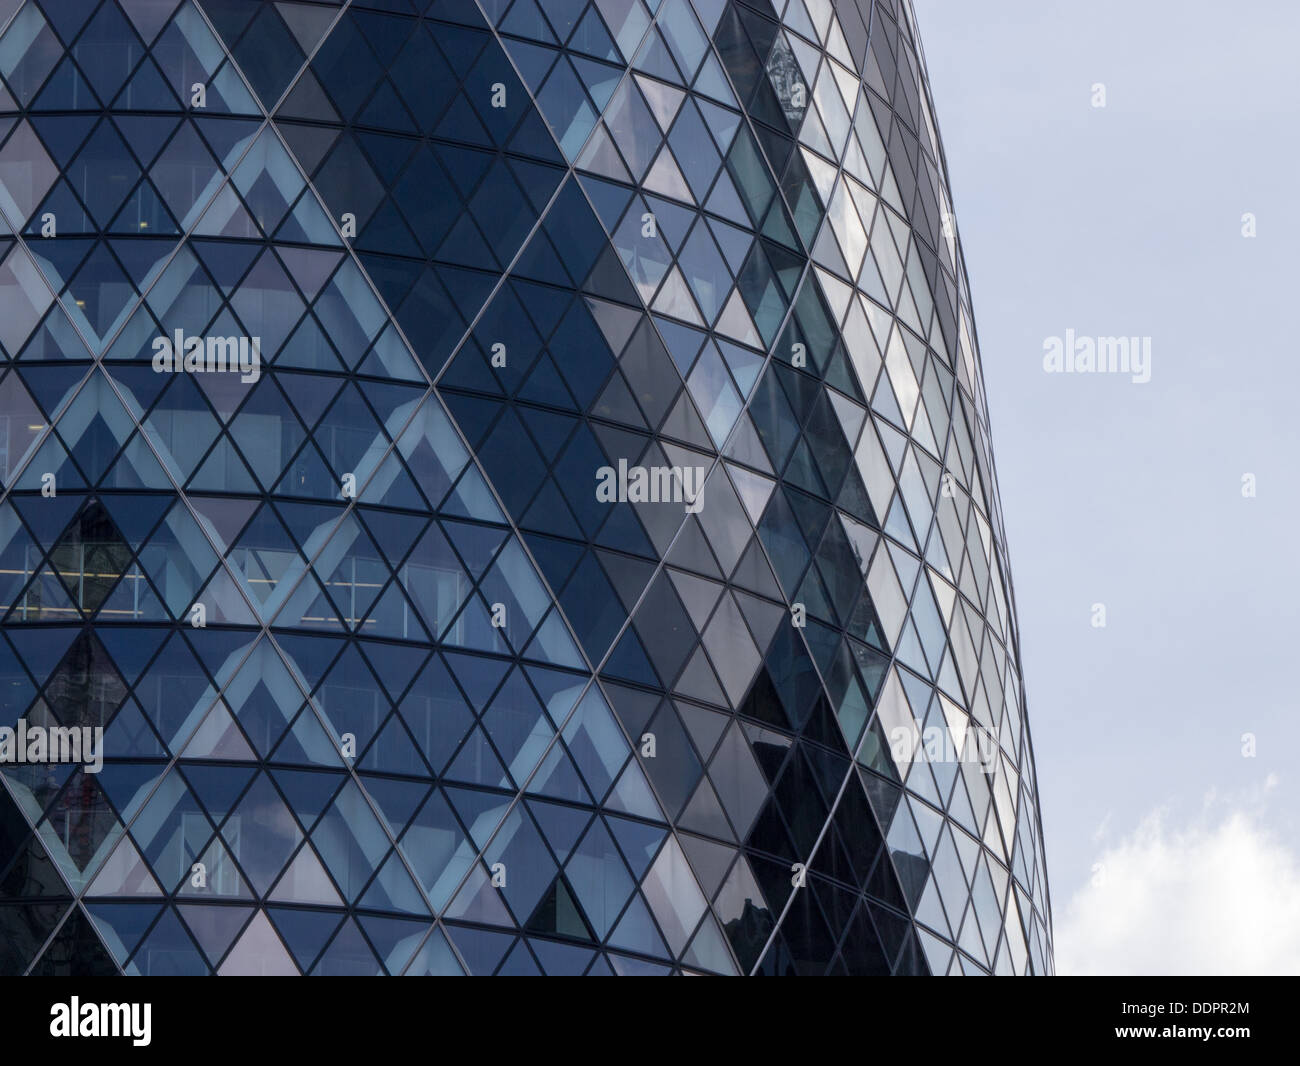 The Swiss Re Building / 30 St Mary Axe in London - The Gherkin - in closeup Stock Photo